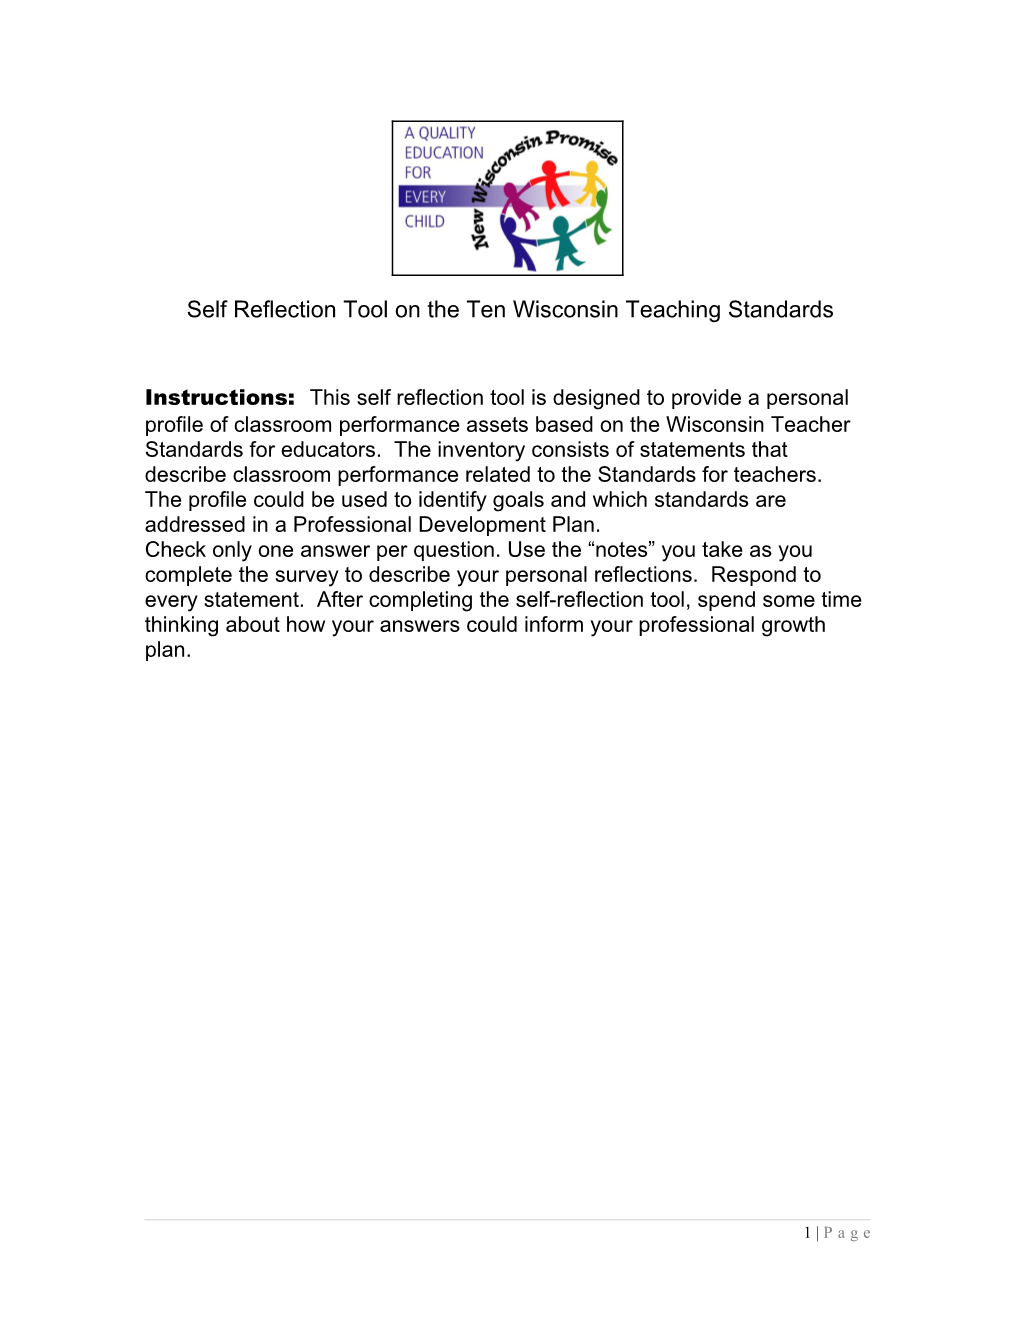 Self Reflection PDP Tool for Teachers